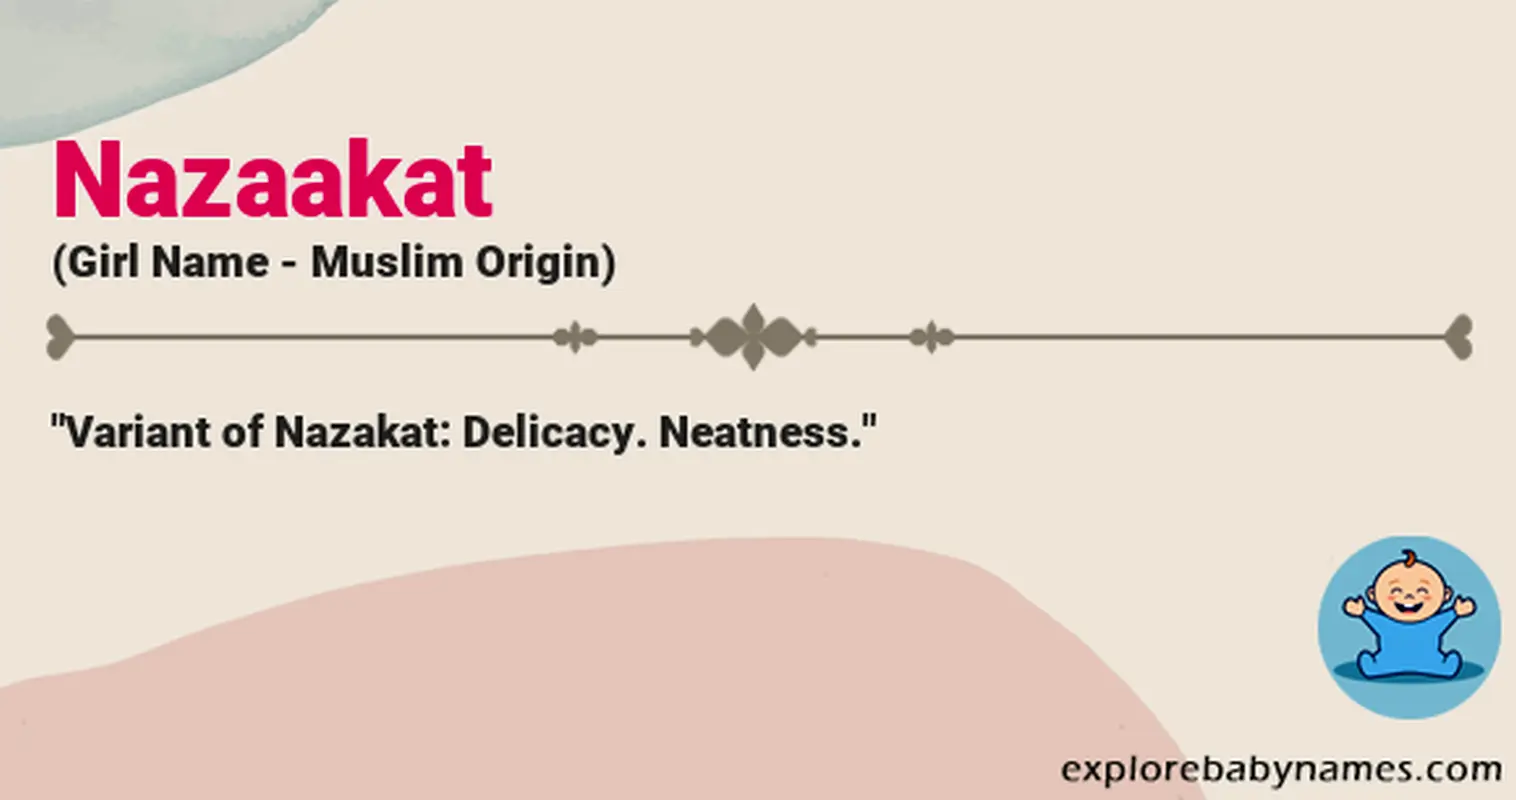 Meaning of Nazaakat